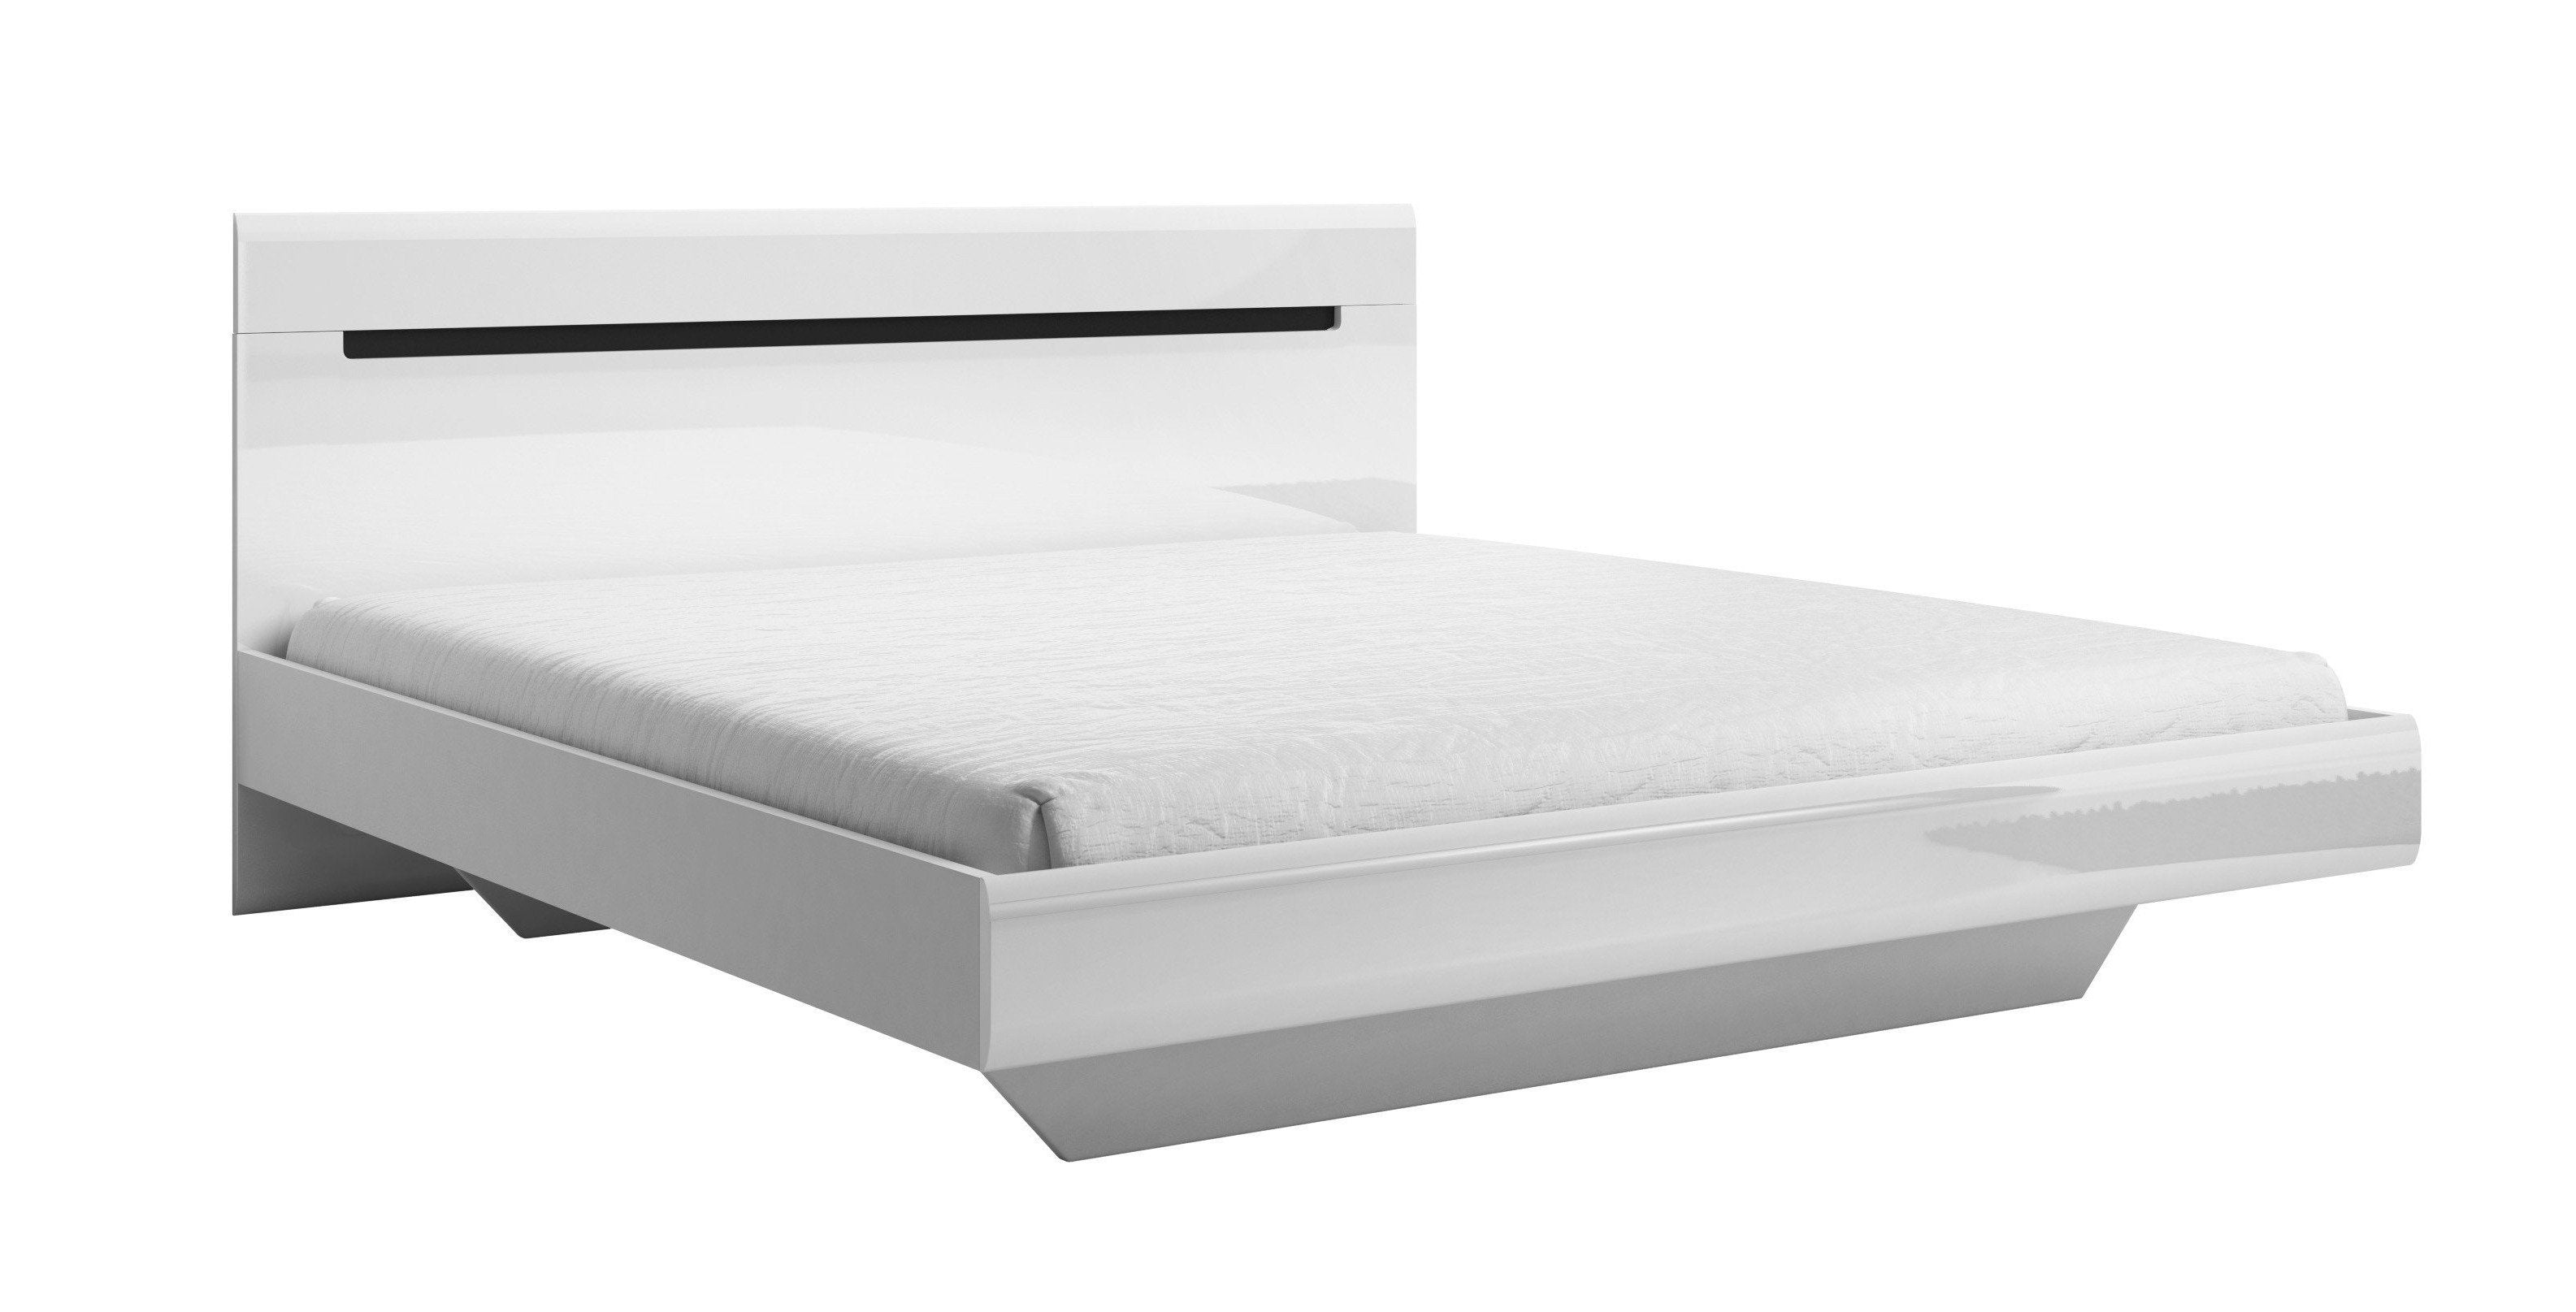 View Hektor 31 Bed 160cm White Gloss 160 x 200cm information